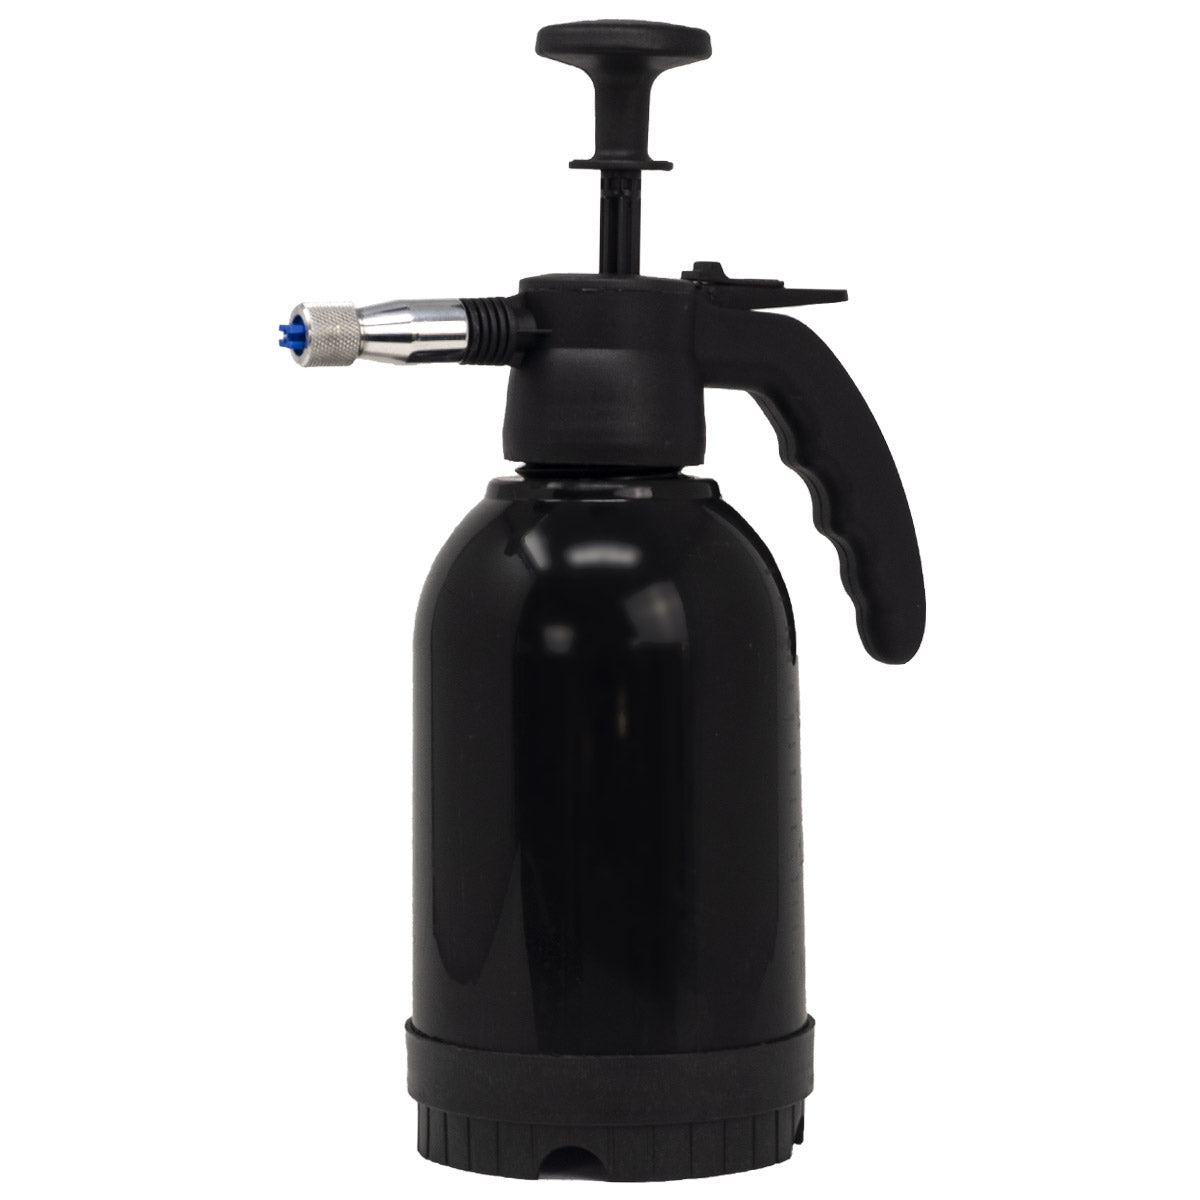 Car Foam Sprayer Wering Bottle for Automotive Detailing House Cleaning